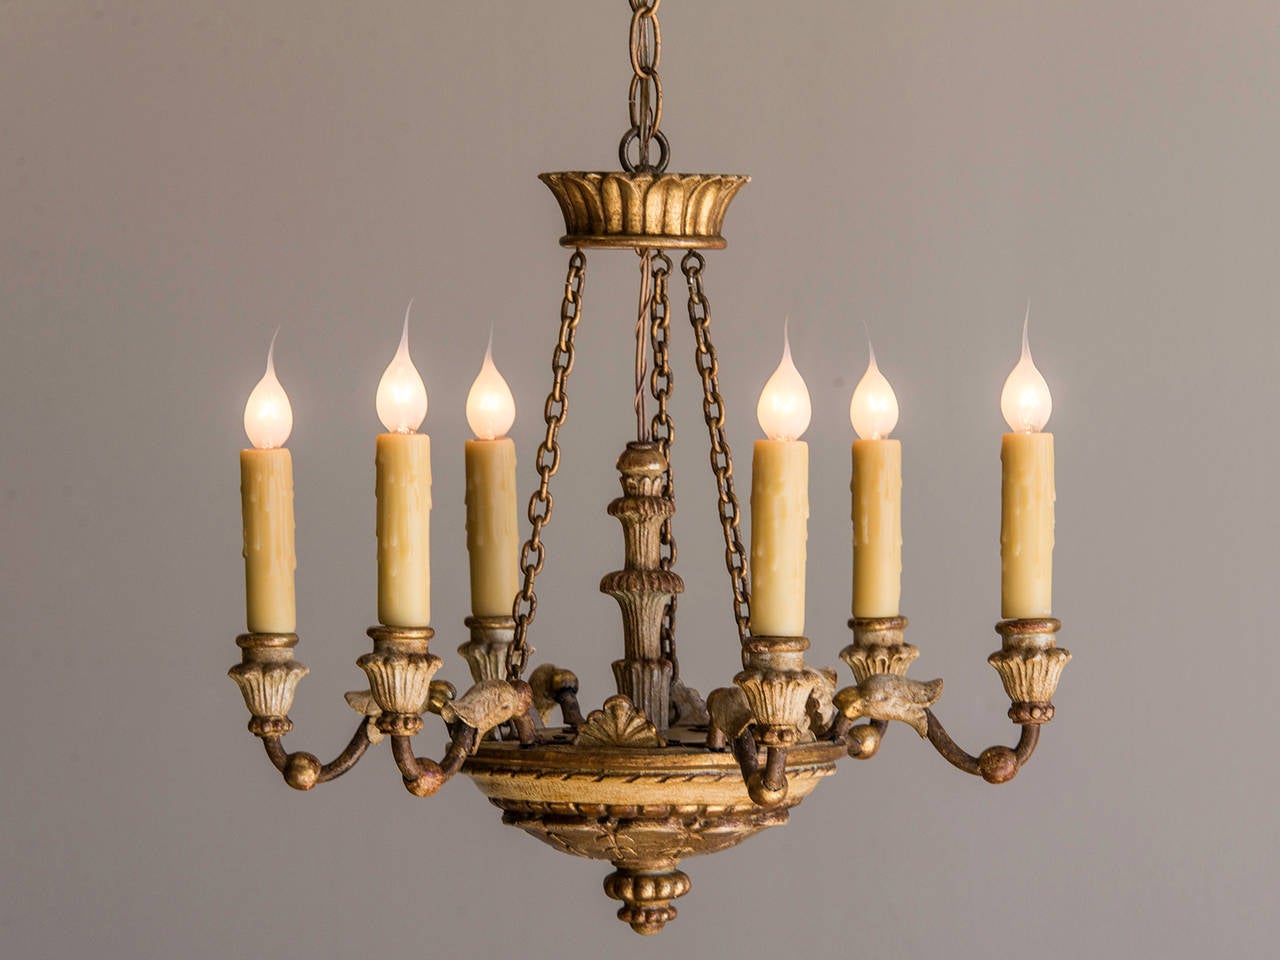 Neoclassical Painted and Gilded Vintage Six Arm Chandelier, Italy c.1920. The charming scale and detail on this fixture makes it a highly desirable addition to any interior where a diminutive light is needed. The circular platform supports the six